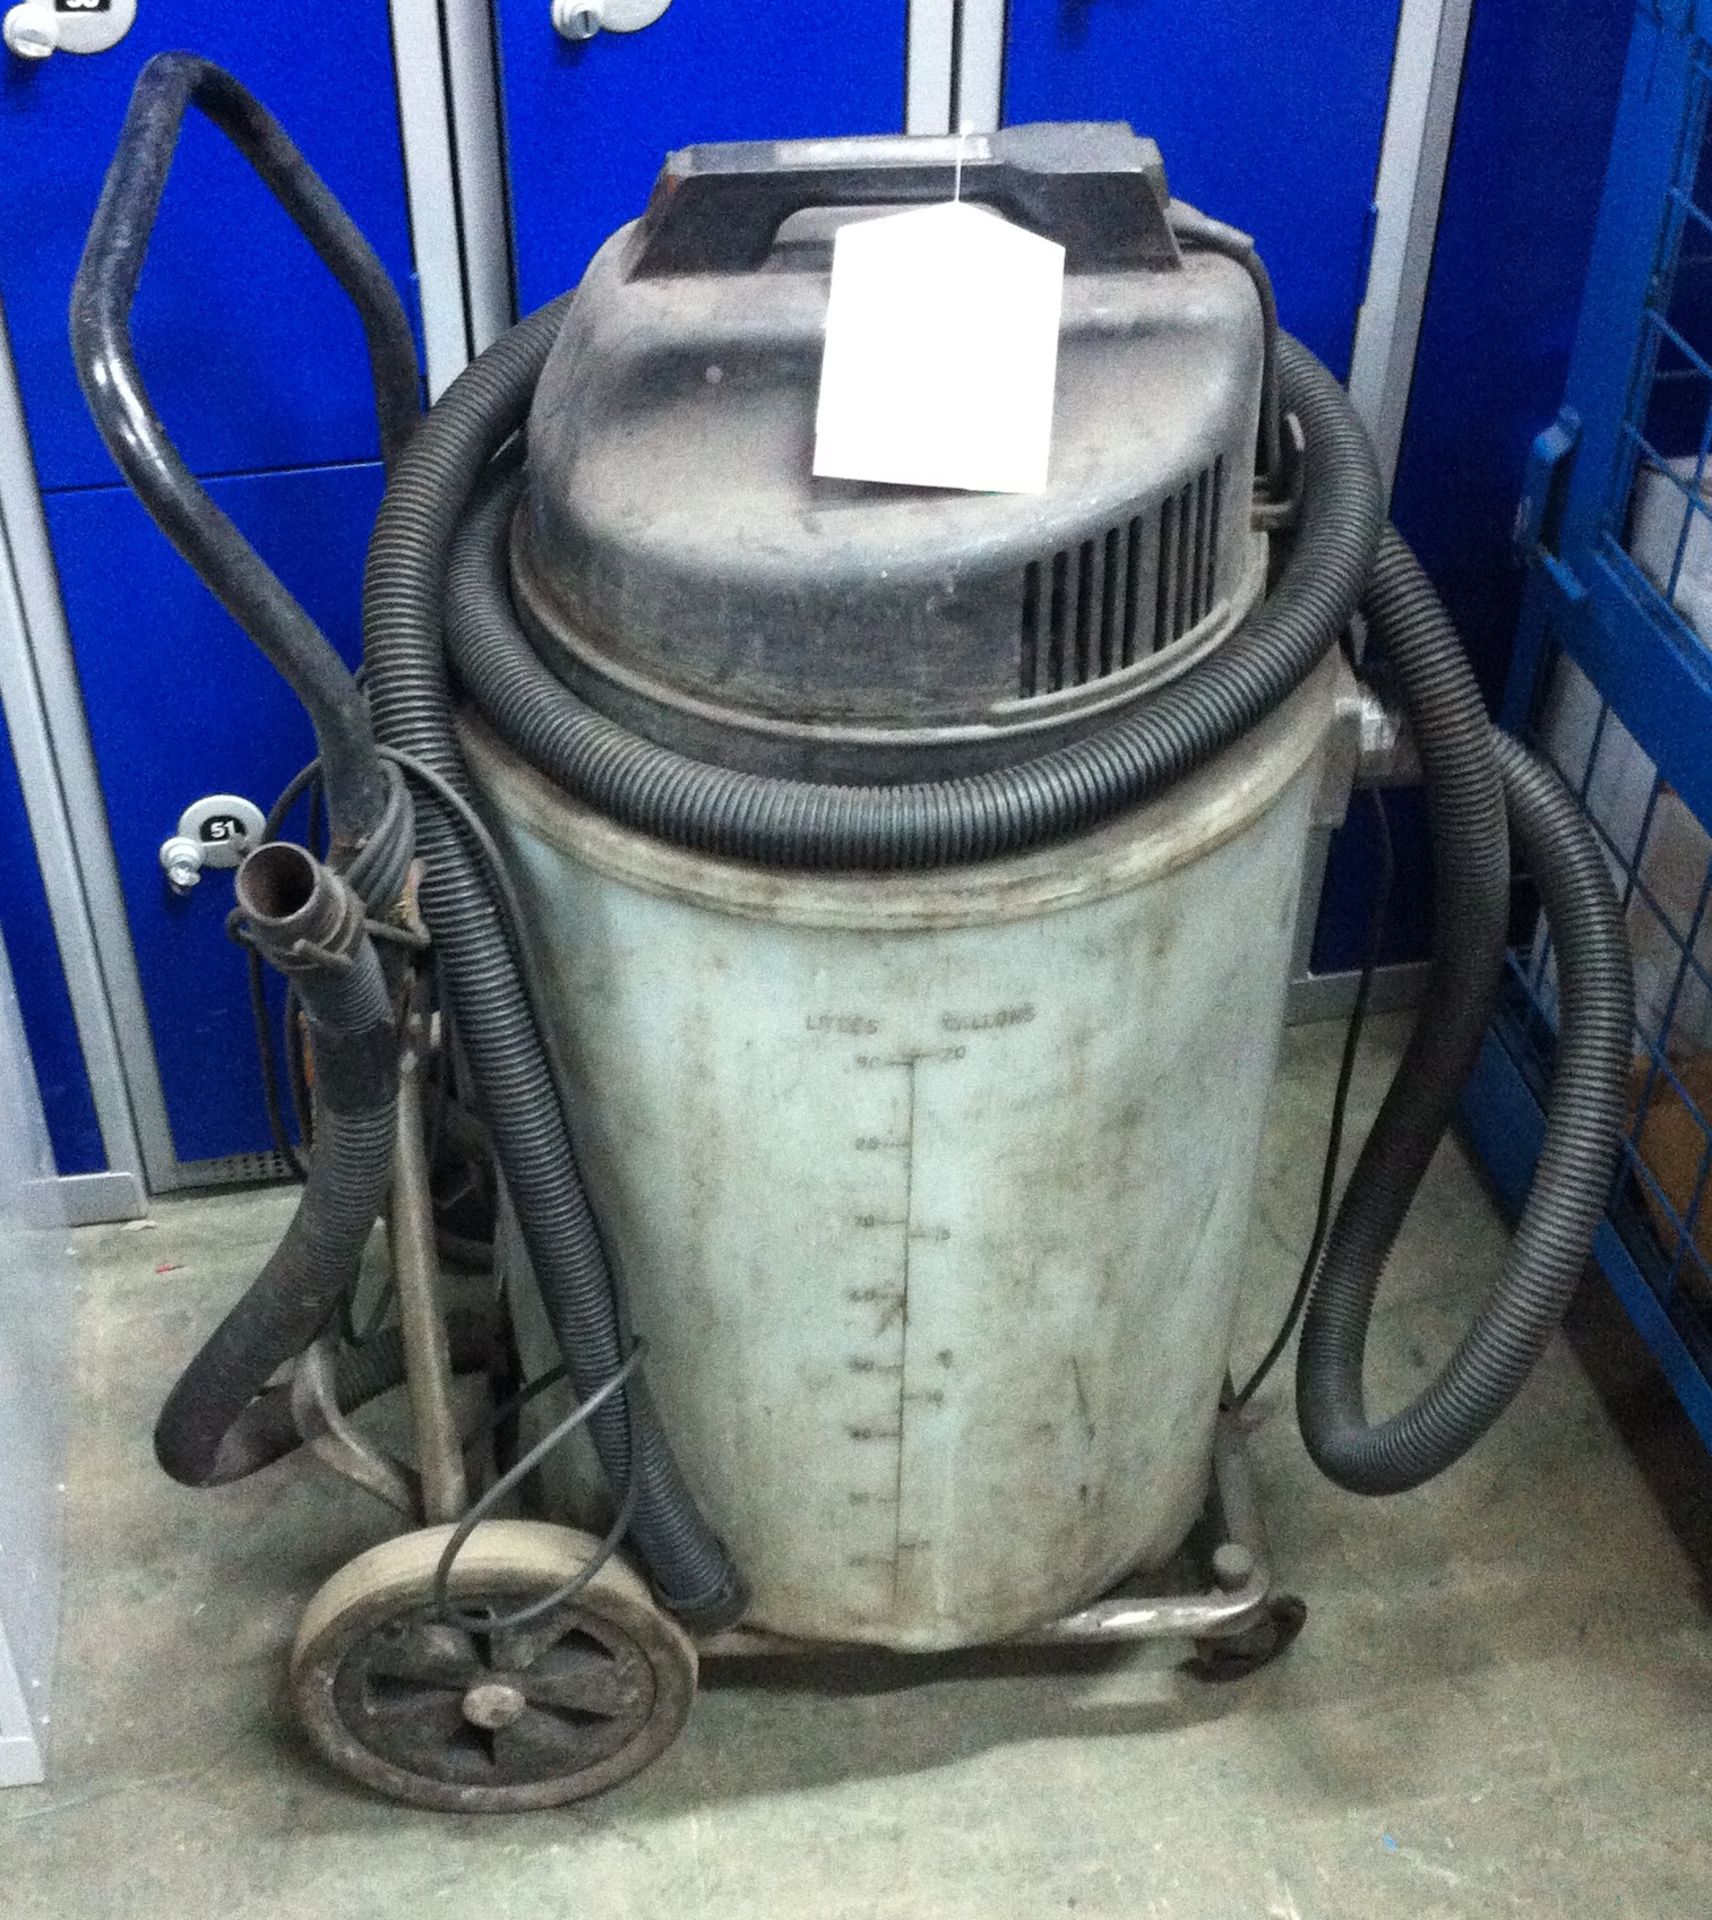 Numatic Floor Cleaner with Trolley